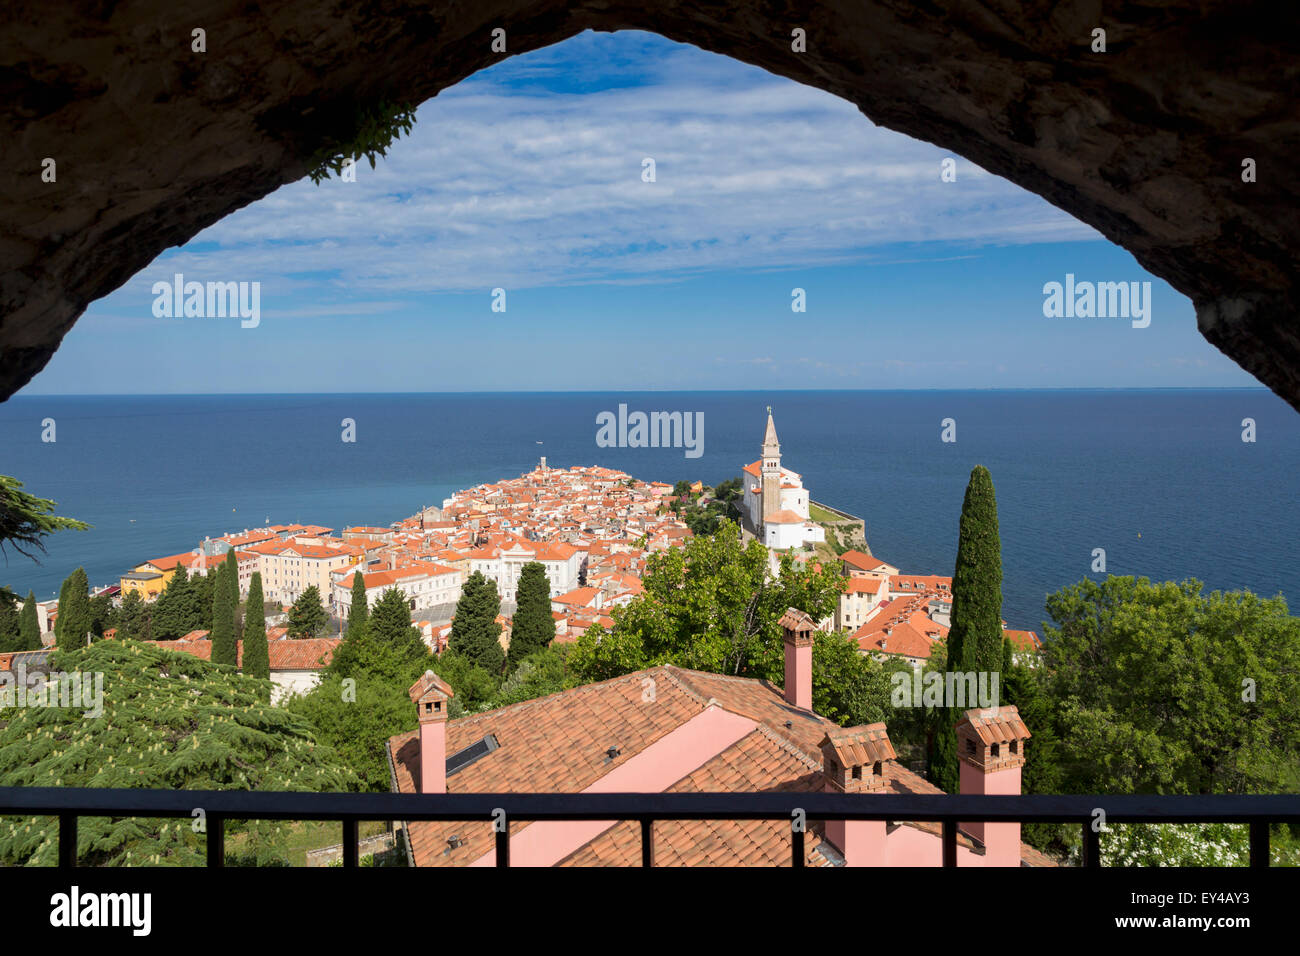 Piran, Primorska, Slovenia. Overall view of the town and of St. George's cathedral from the Town Walls. Stock Photo